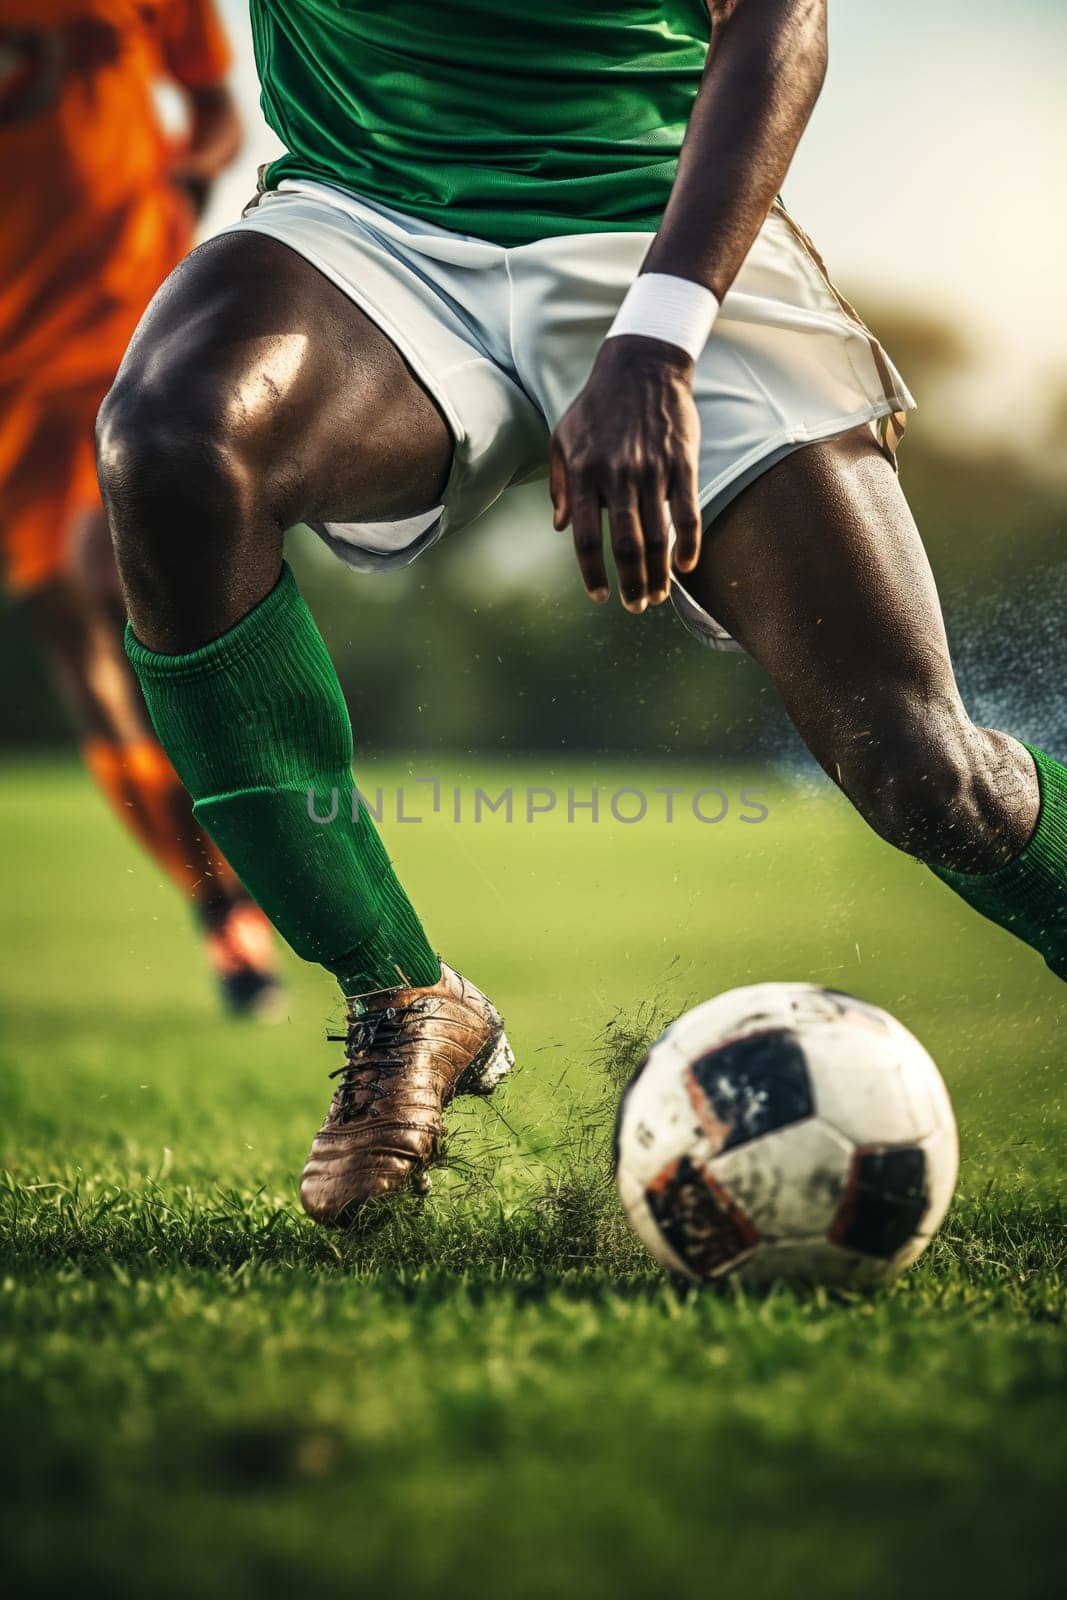 Soccer players dribbling struggling and kicking a ball on a field by dimol